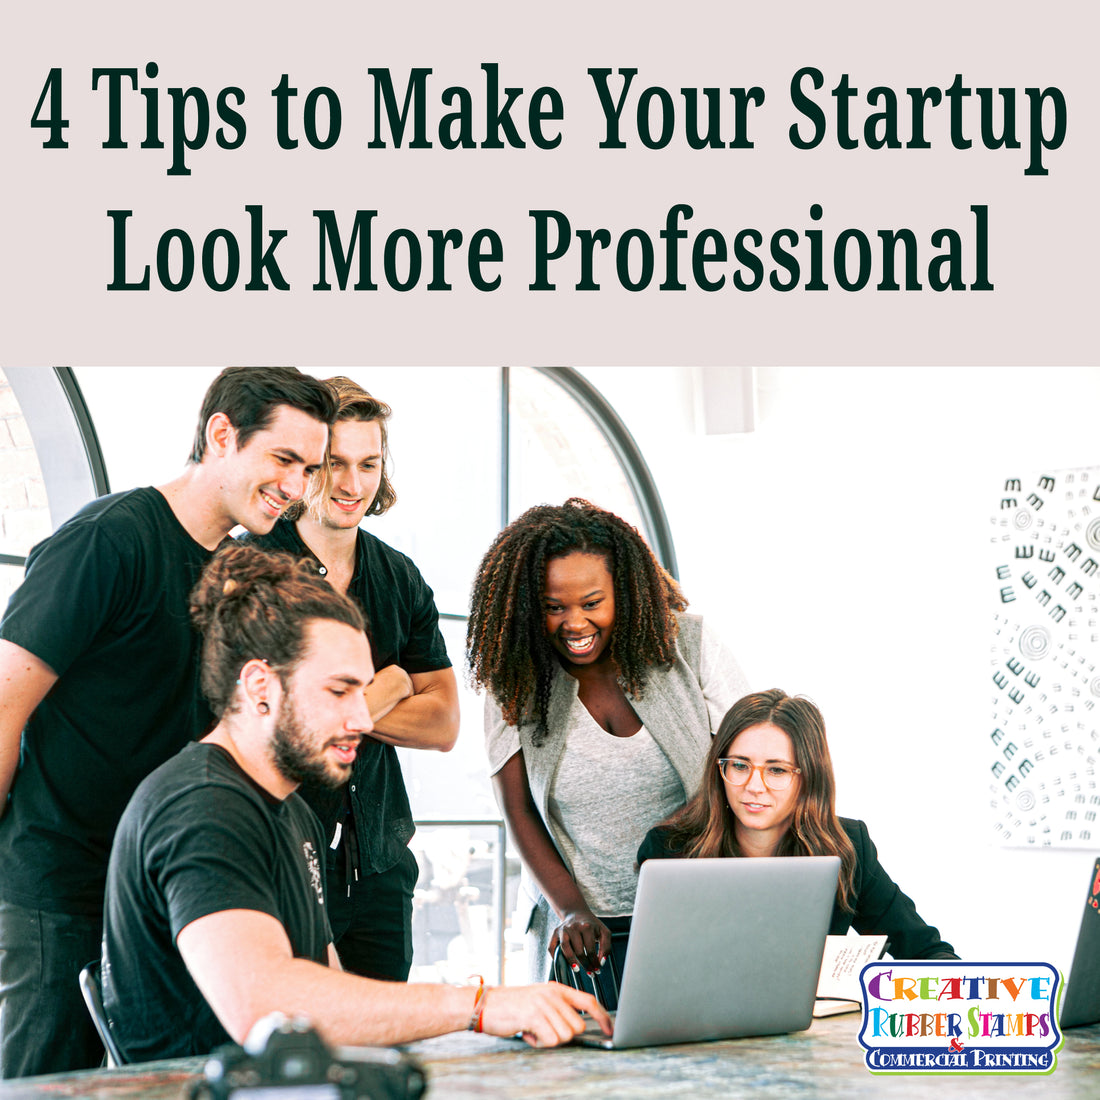 4 Tips to Make Your Startup Look More Professional